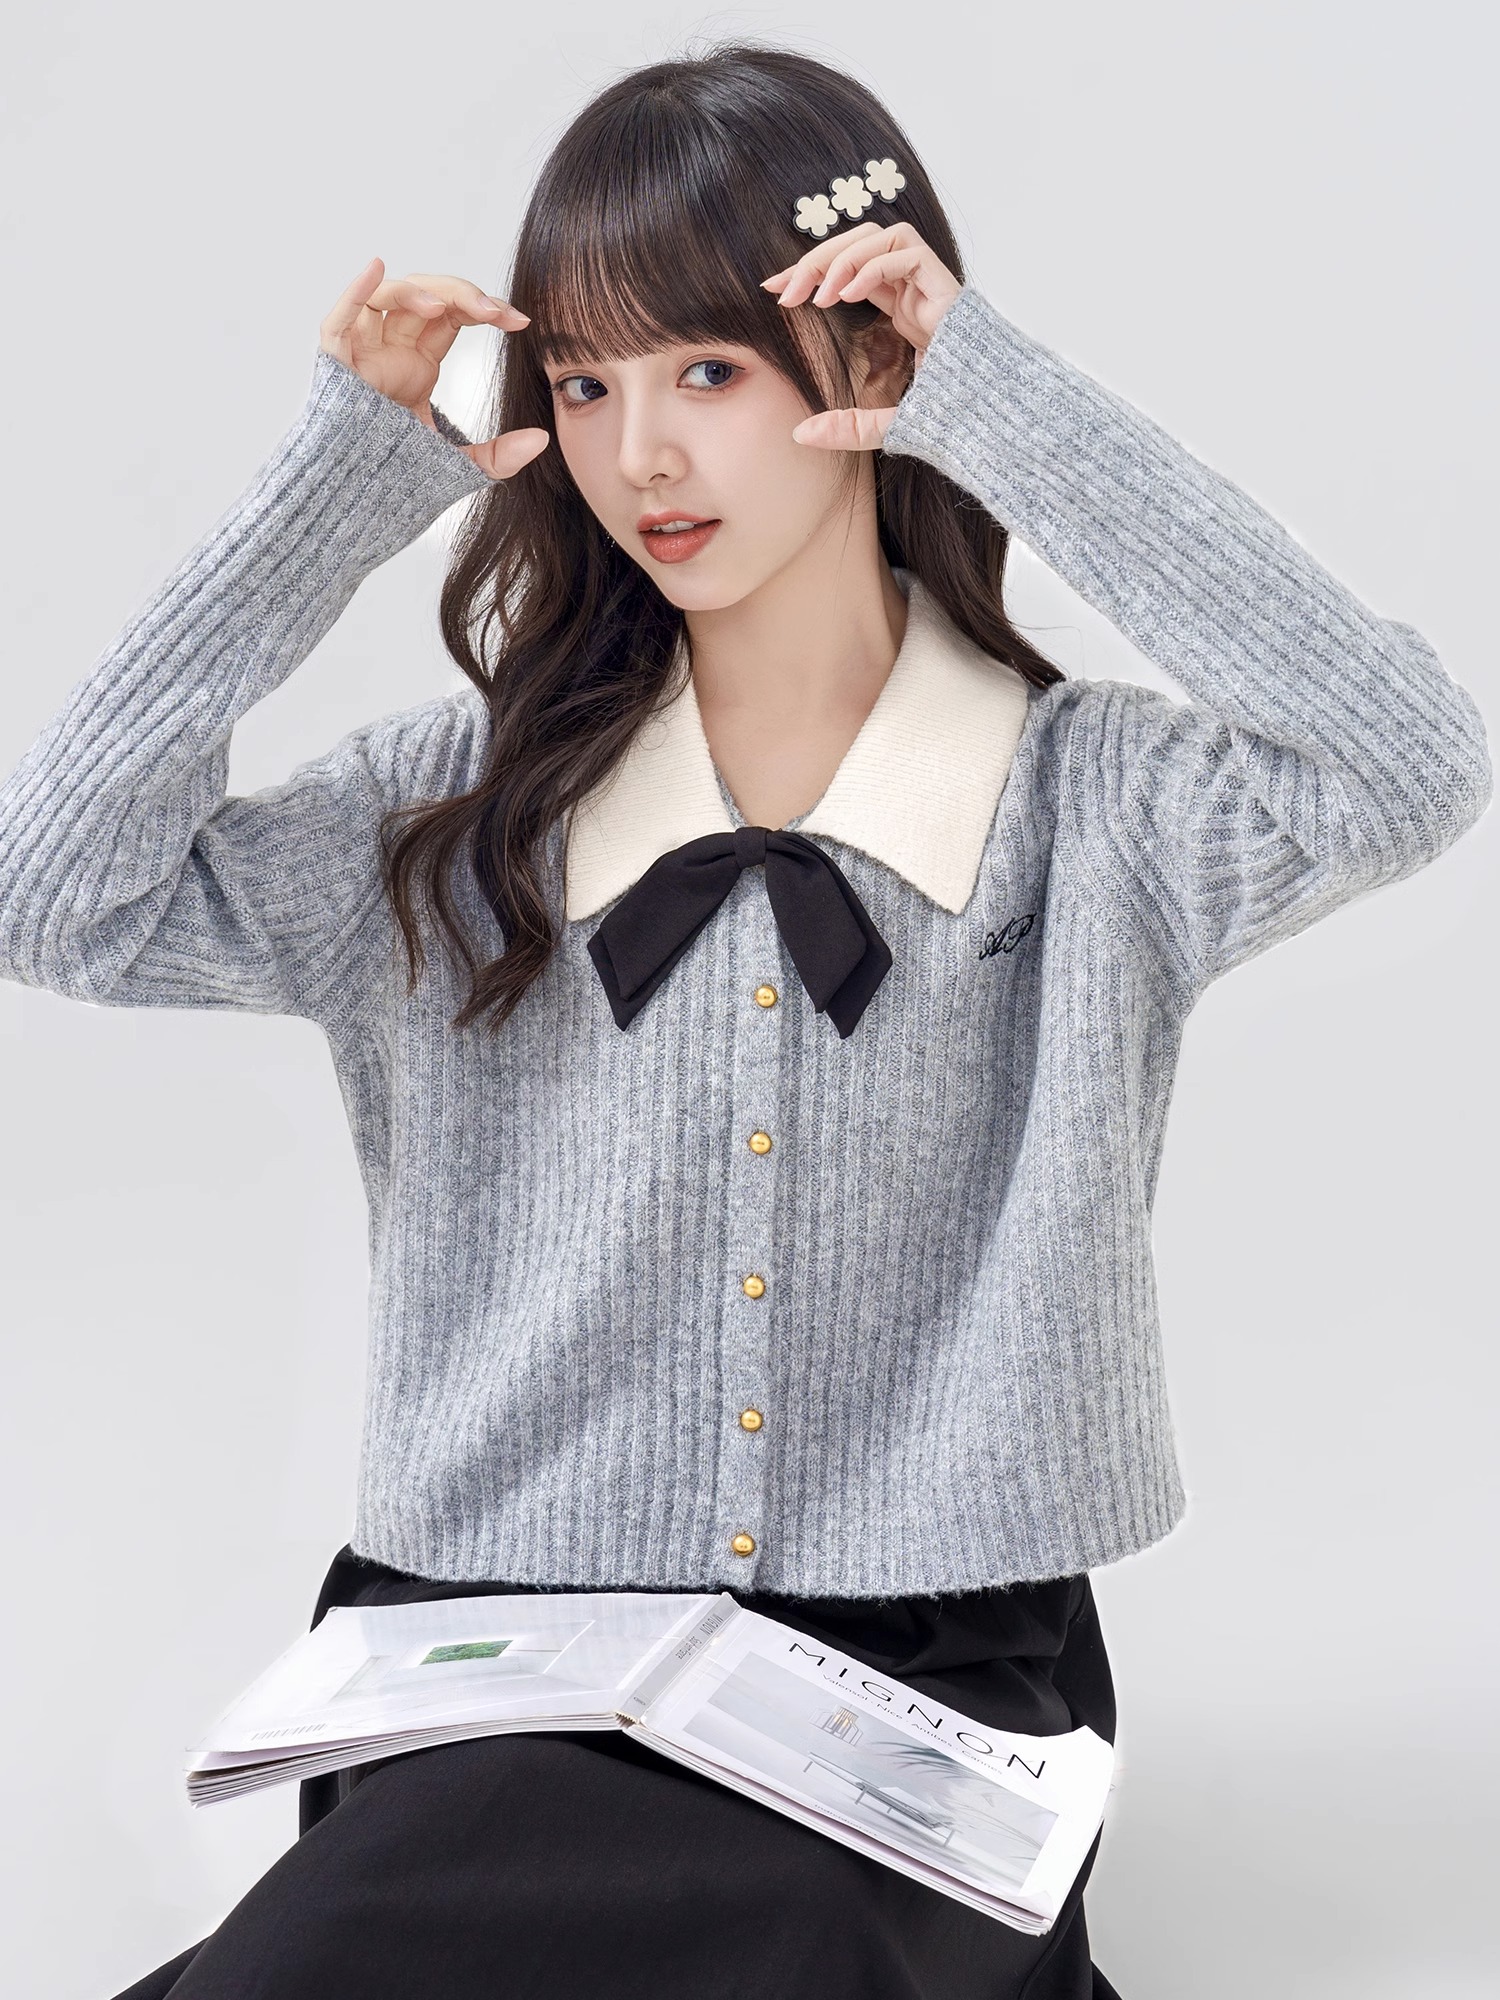 Bokaqi  autumn and winter new lapel bow knitted cardigan women's college style niche contrast color short sweater